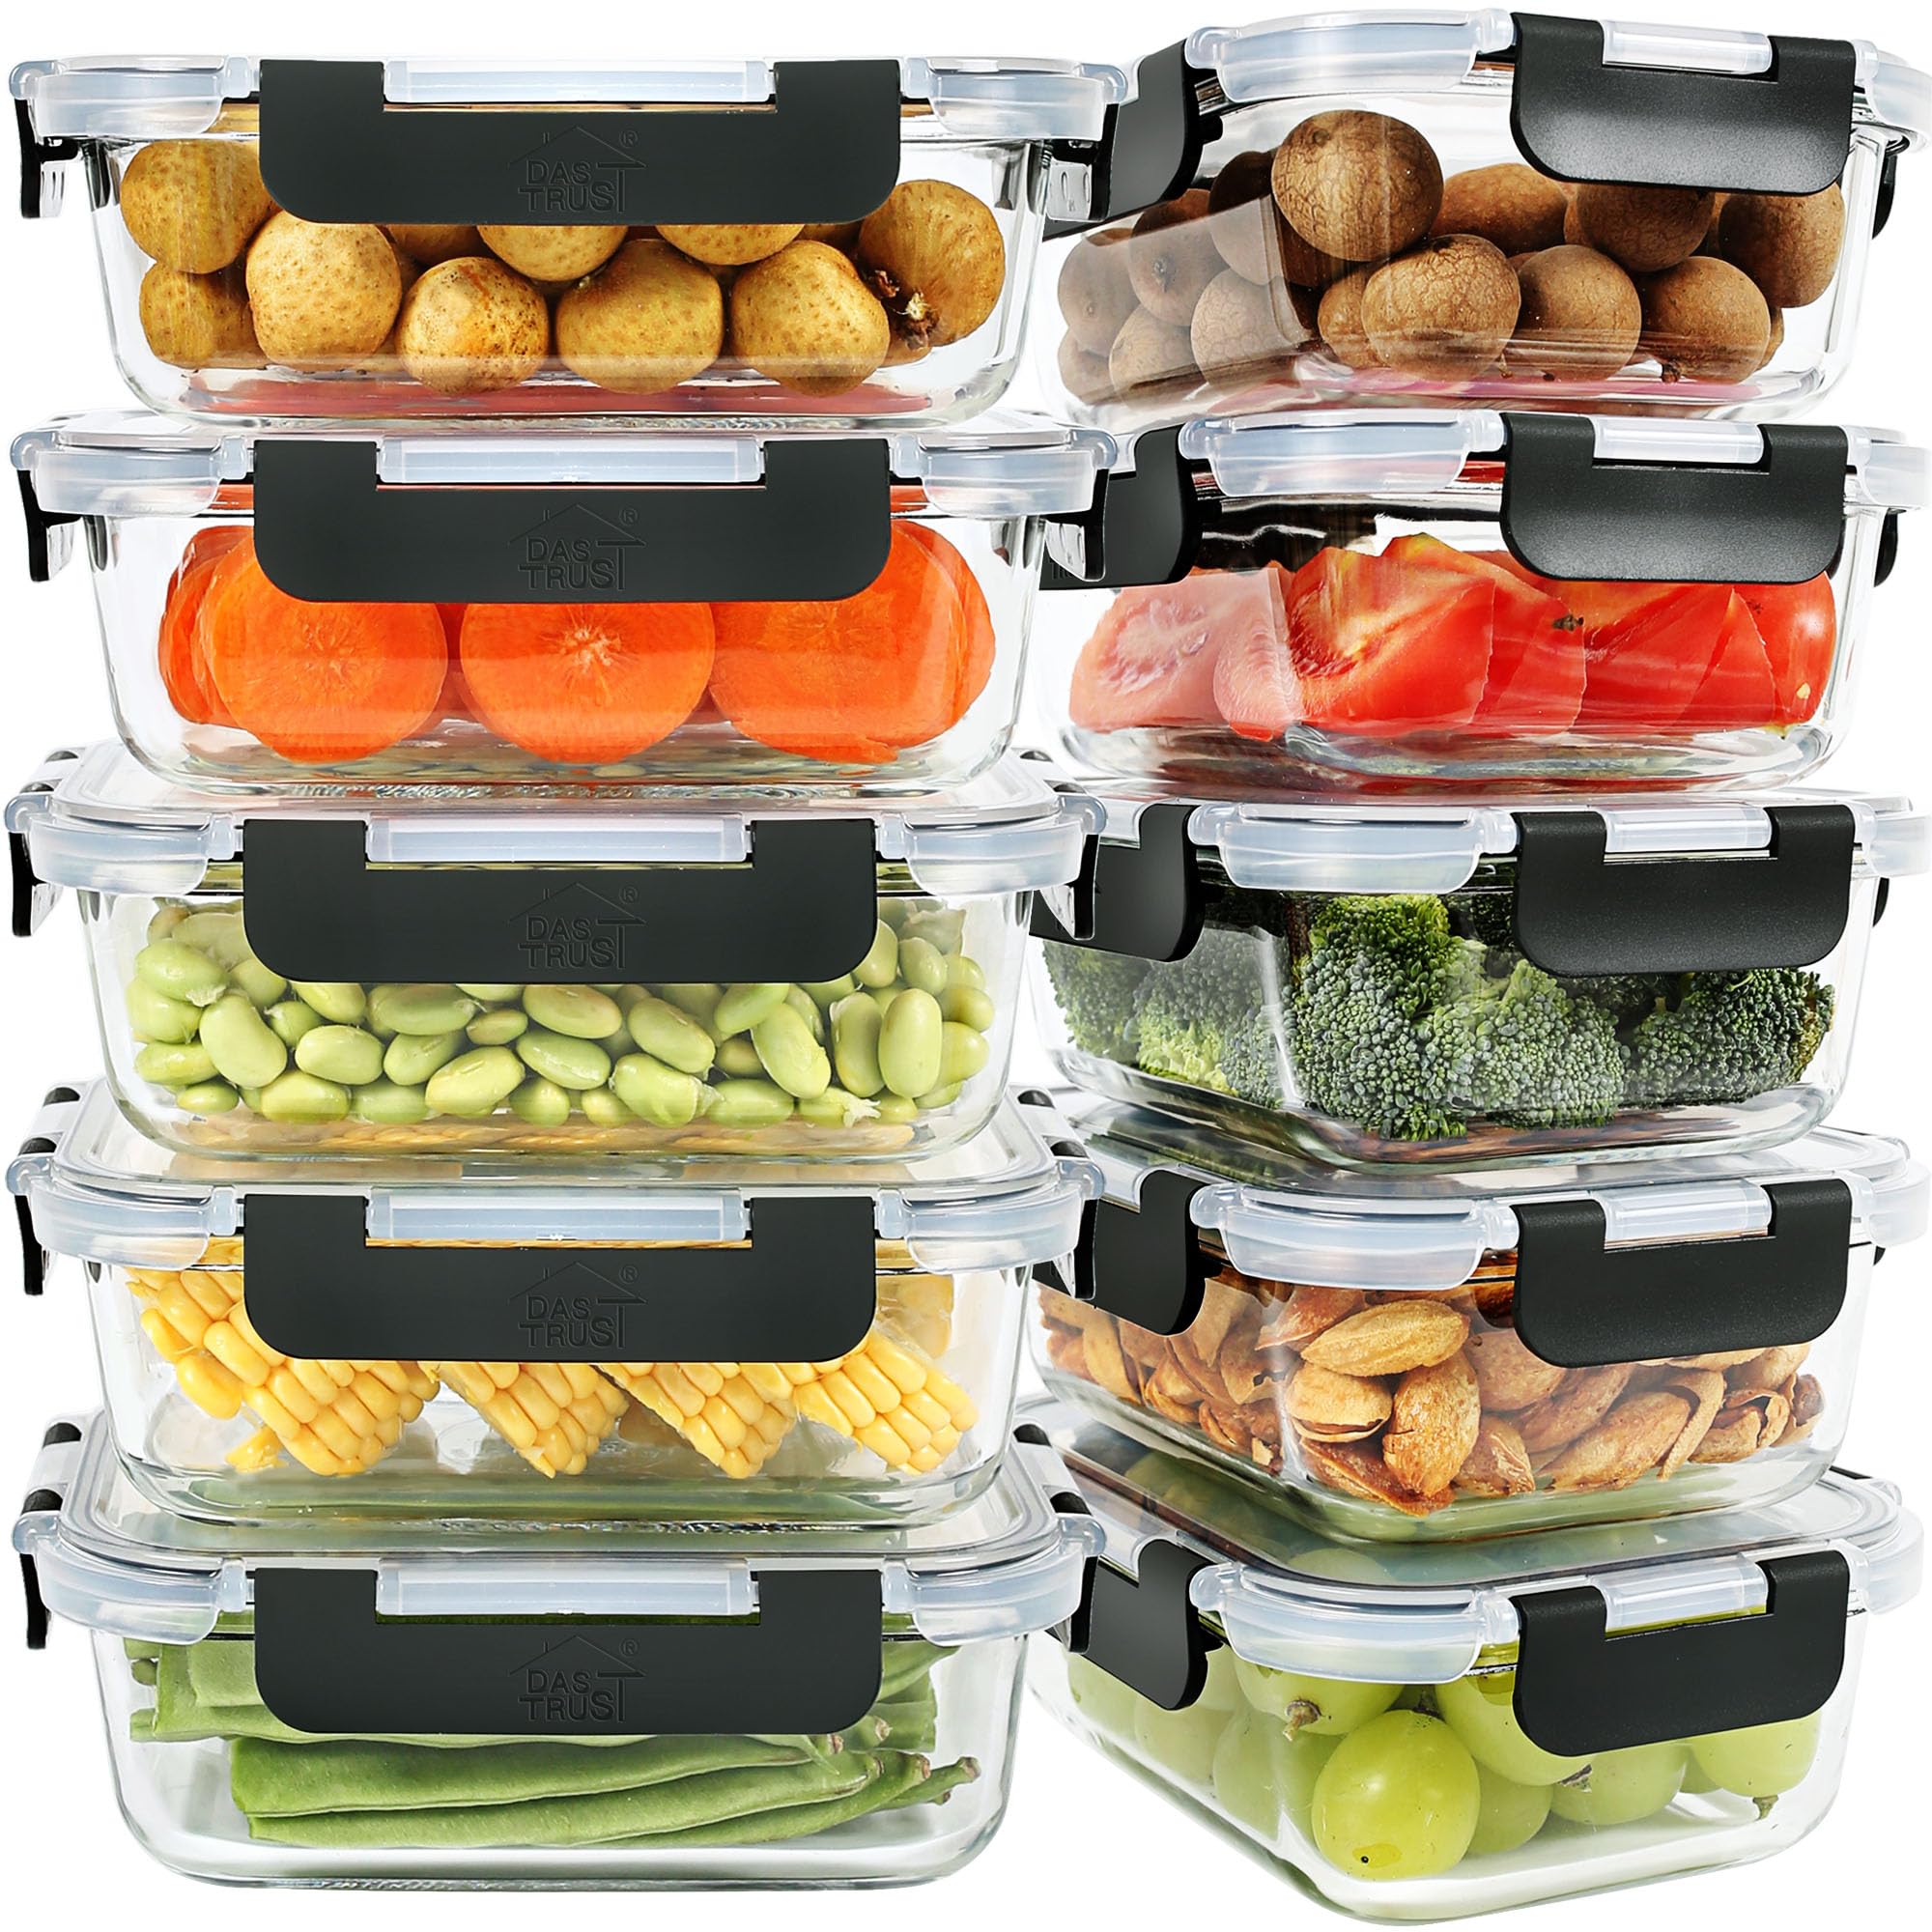 DAS TRUST 10 Pack Glass Meal Prep Containers Microwave Safe Meal Prep Bowls Food Storage Containers Glass Food Prep Containers with Lids Lunch Containers for Adults Meal Prep Lunch Box Bento Boxes